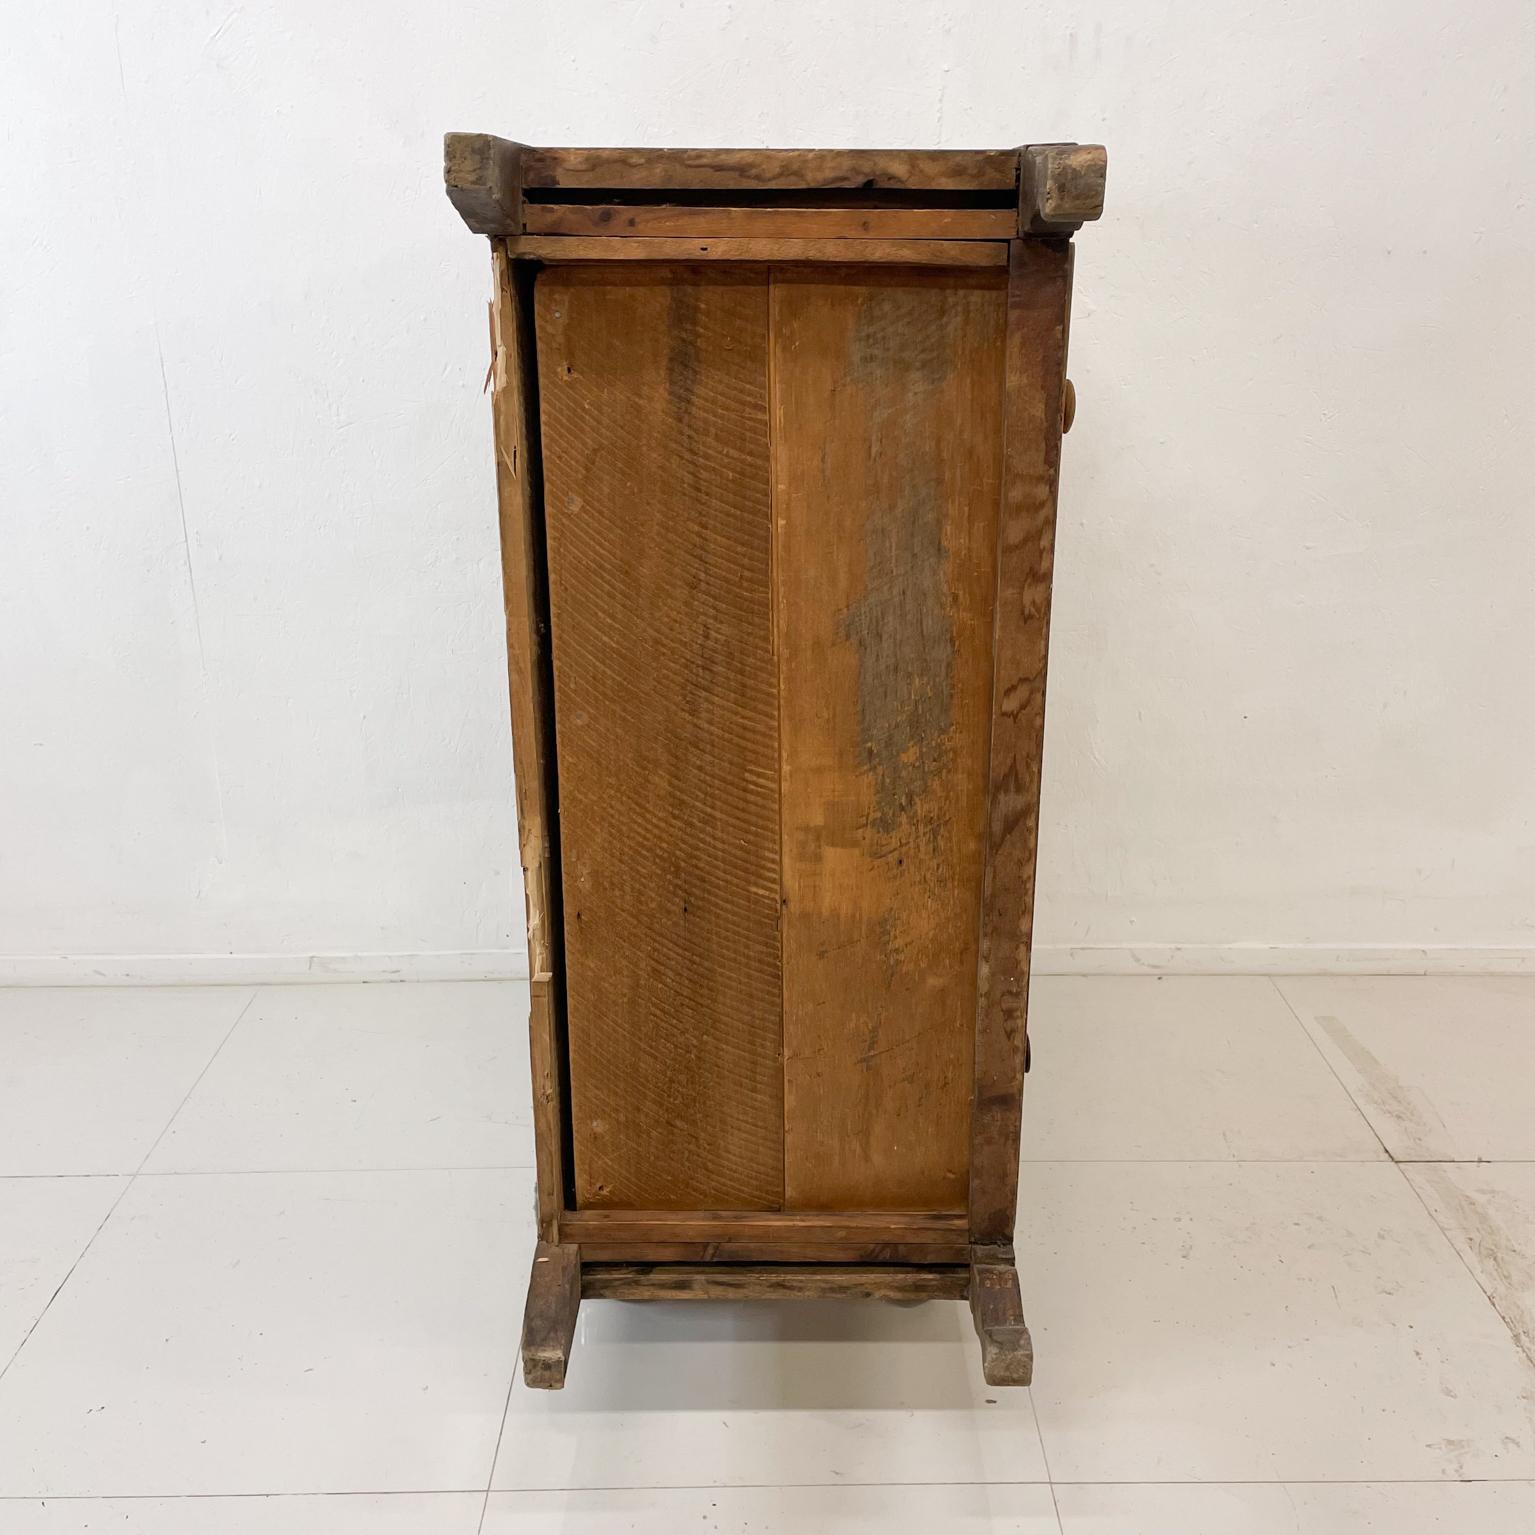 We are presenting:
Antique wood dresser Skeleton Key Hole Skinny double dove tail construction. Distressed late 1800s.
Unmarked.
Dimensions: 47 H x 40.5 W x 20.25 D inches Drawers (1) 16.63 x 38.13 W x 8.5 H, (2) 6 (3) 7 (4) 8.25 inches
In